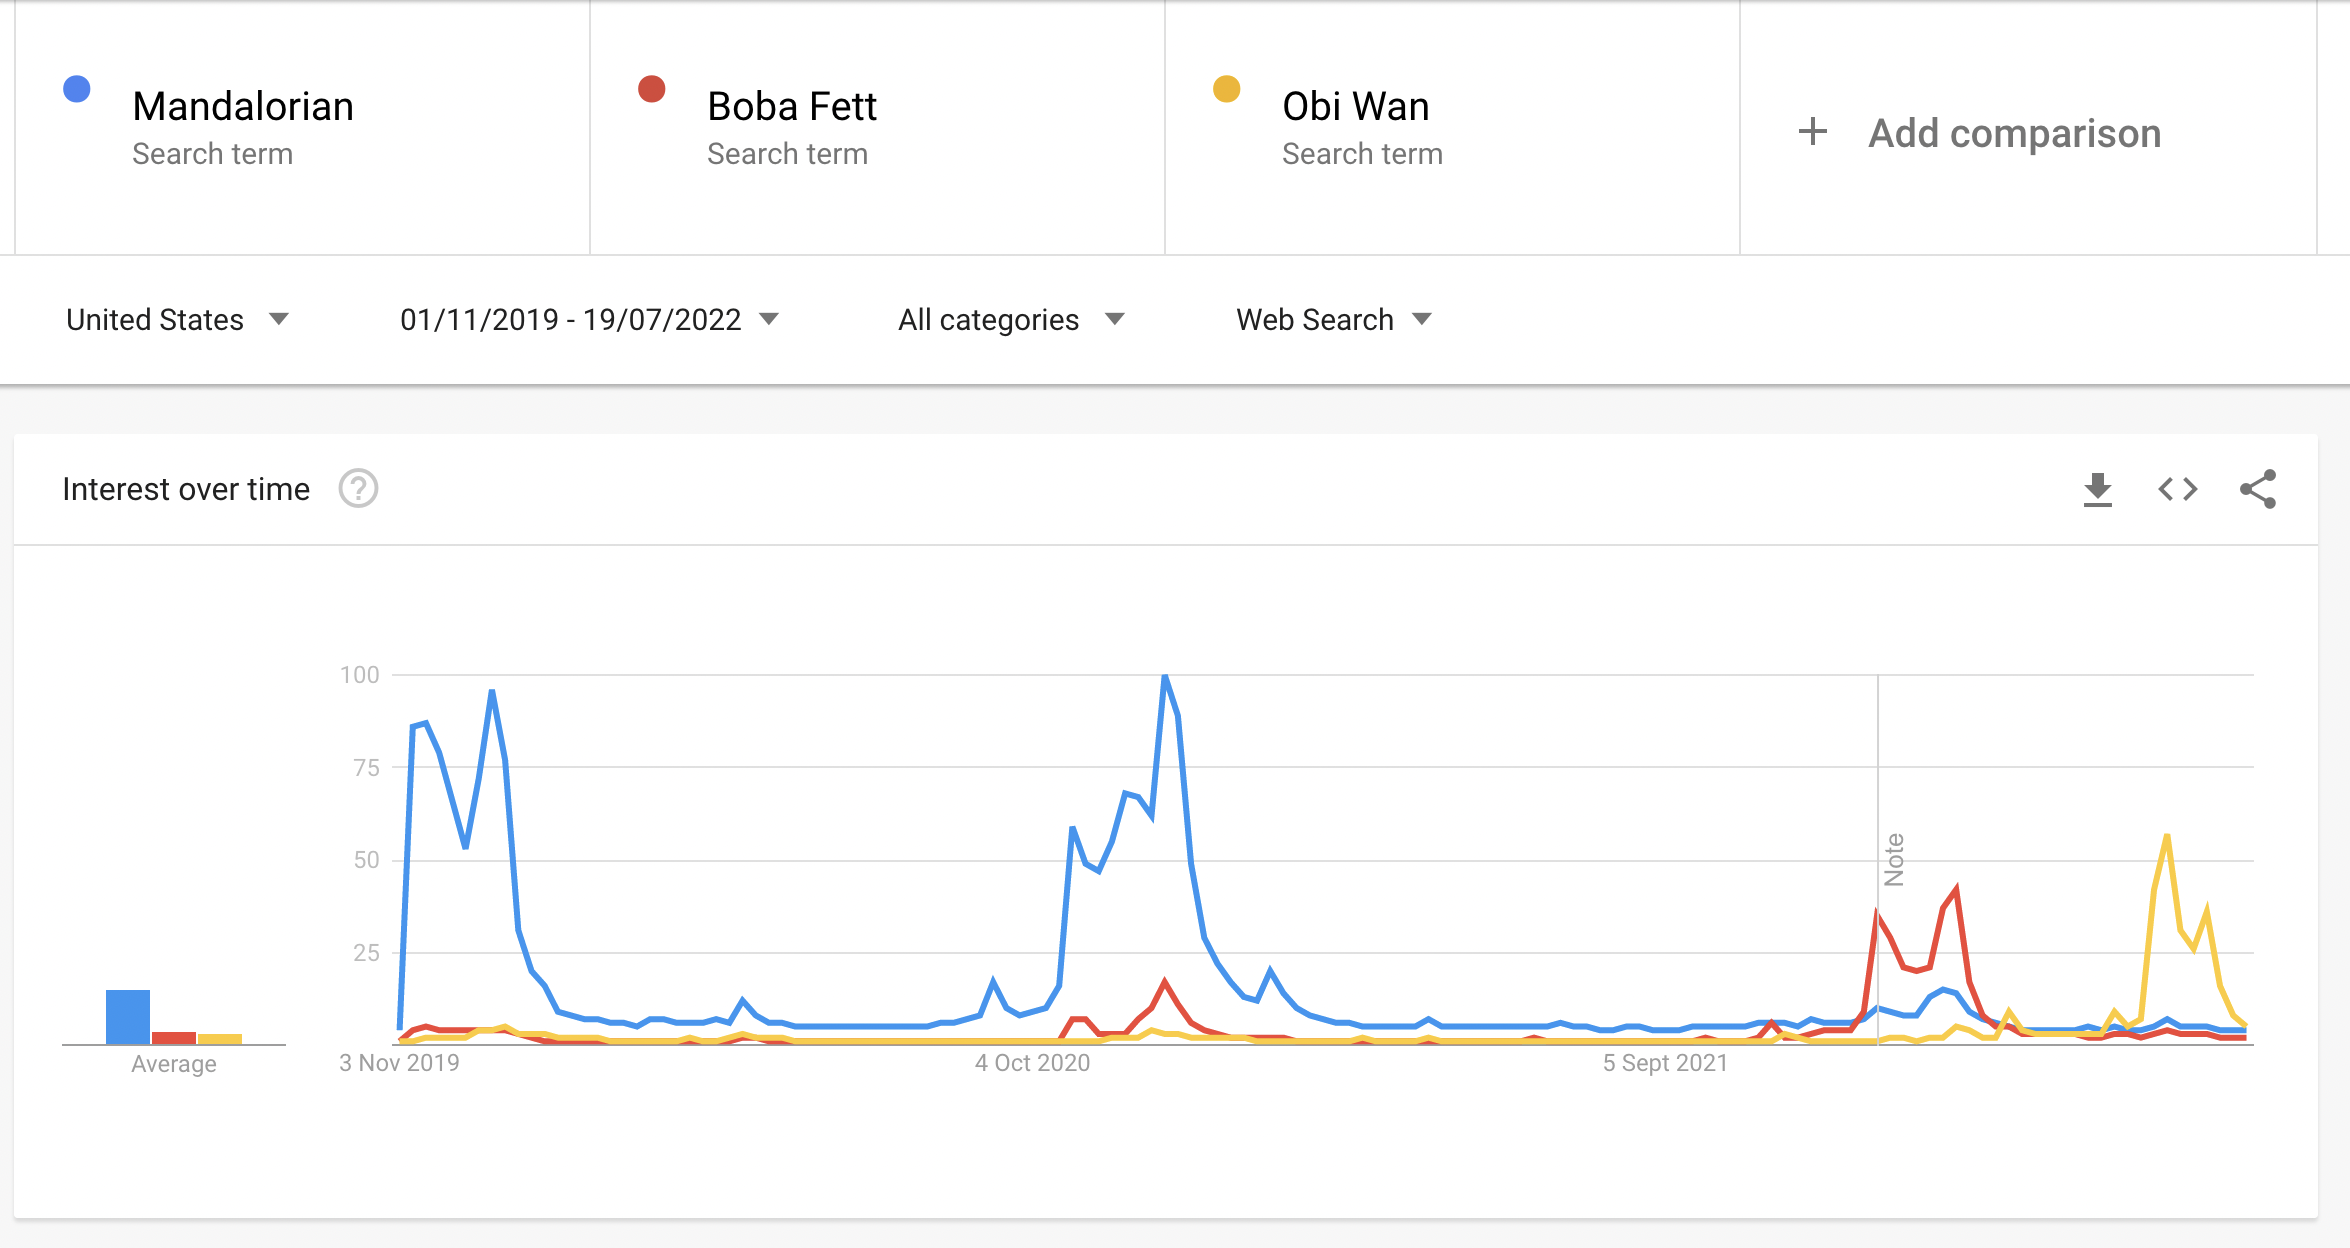 Comparison between the Star Wars search terms "Mandalorian", "Boba Fett", and "Obi Wan" in the U.S., from November 1, 2020, to July 19, 2022.